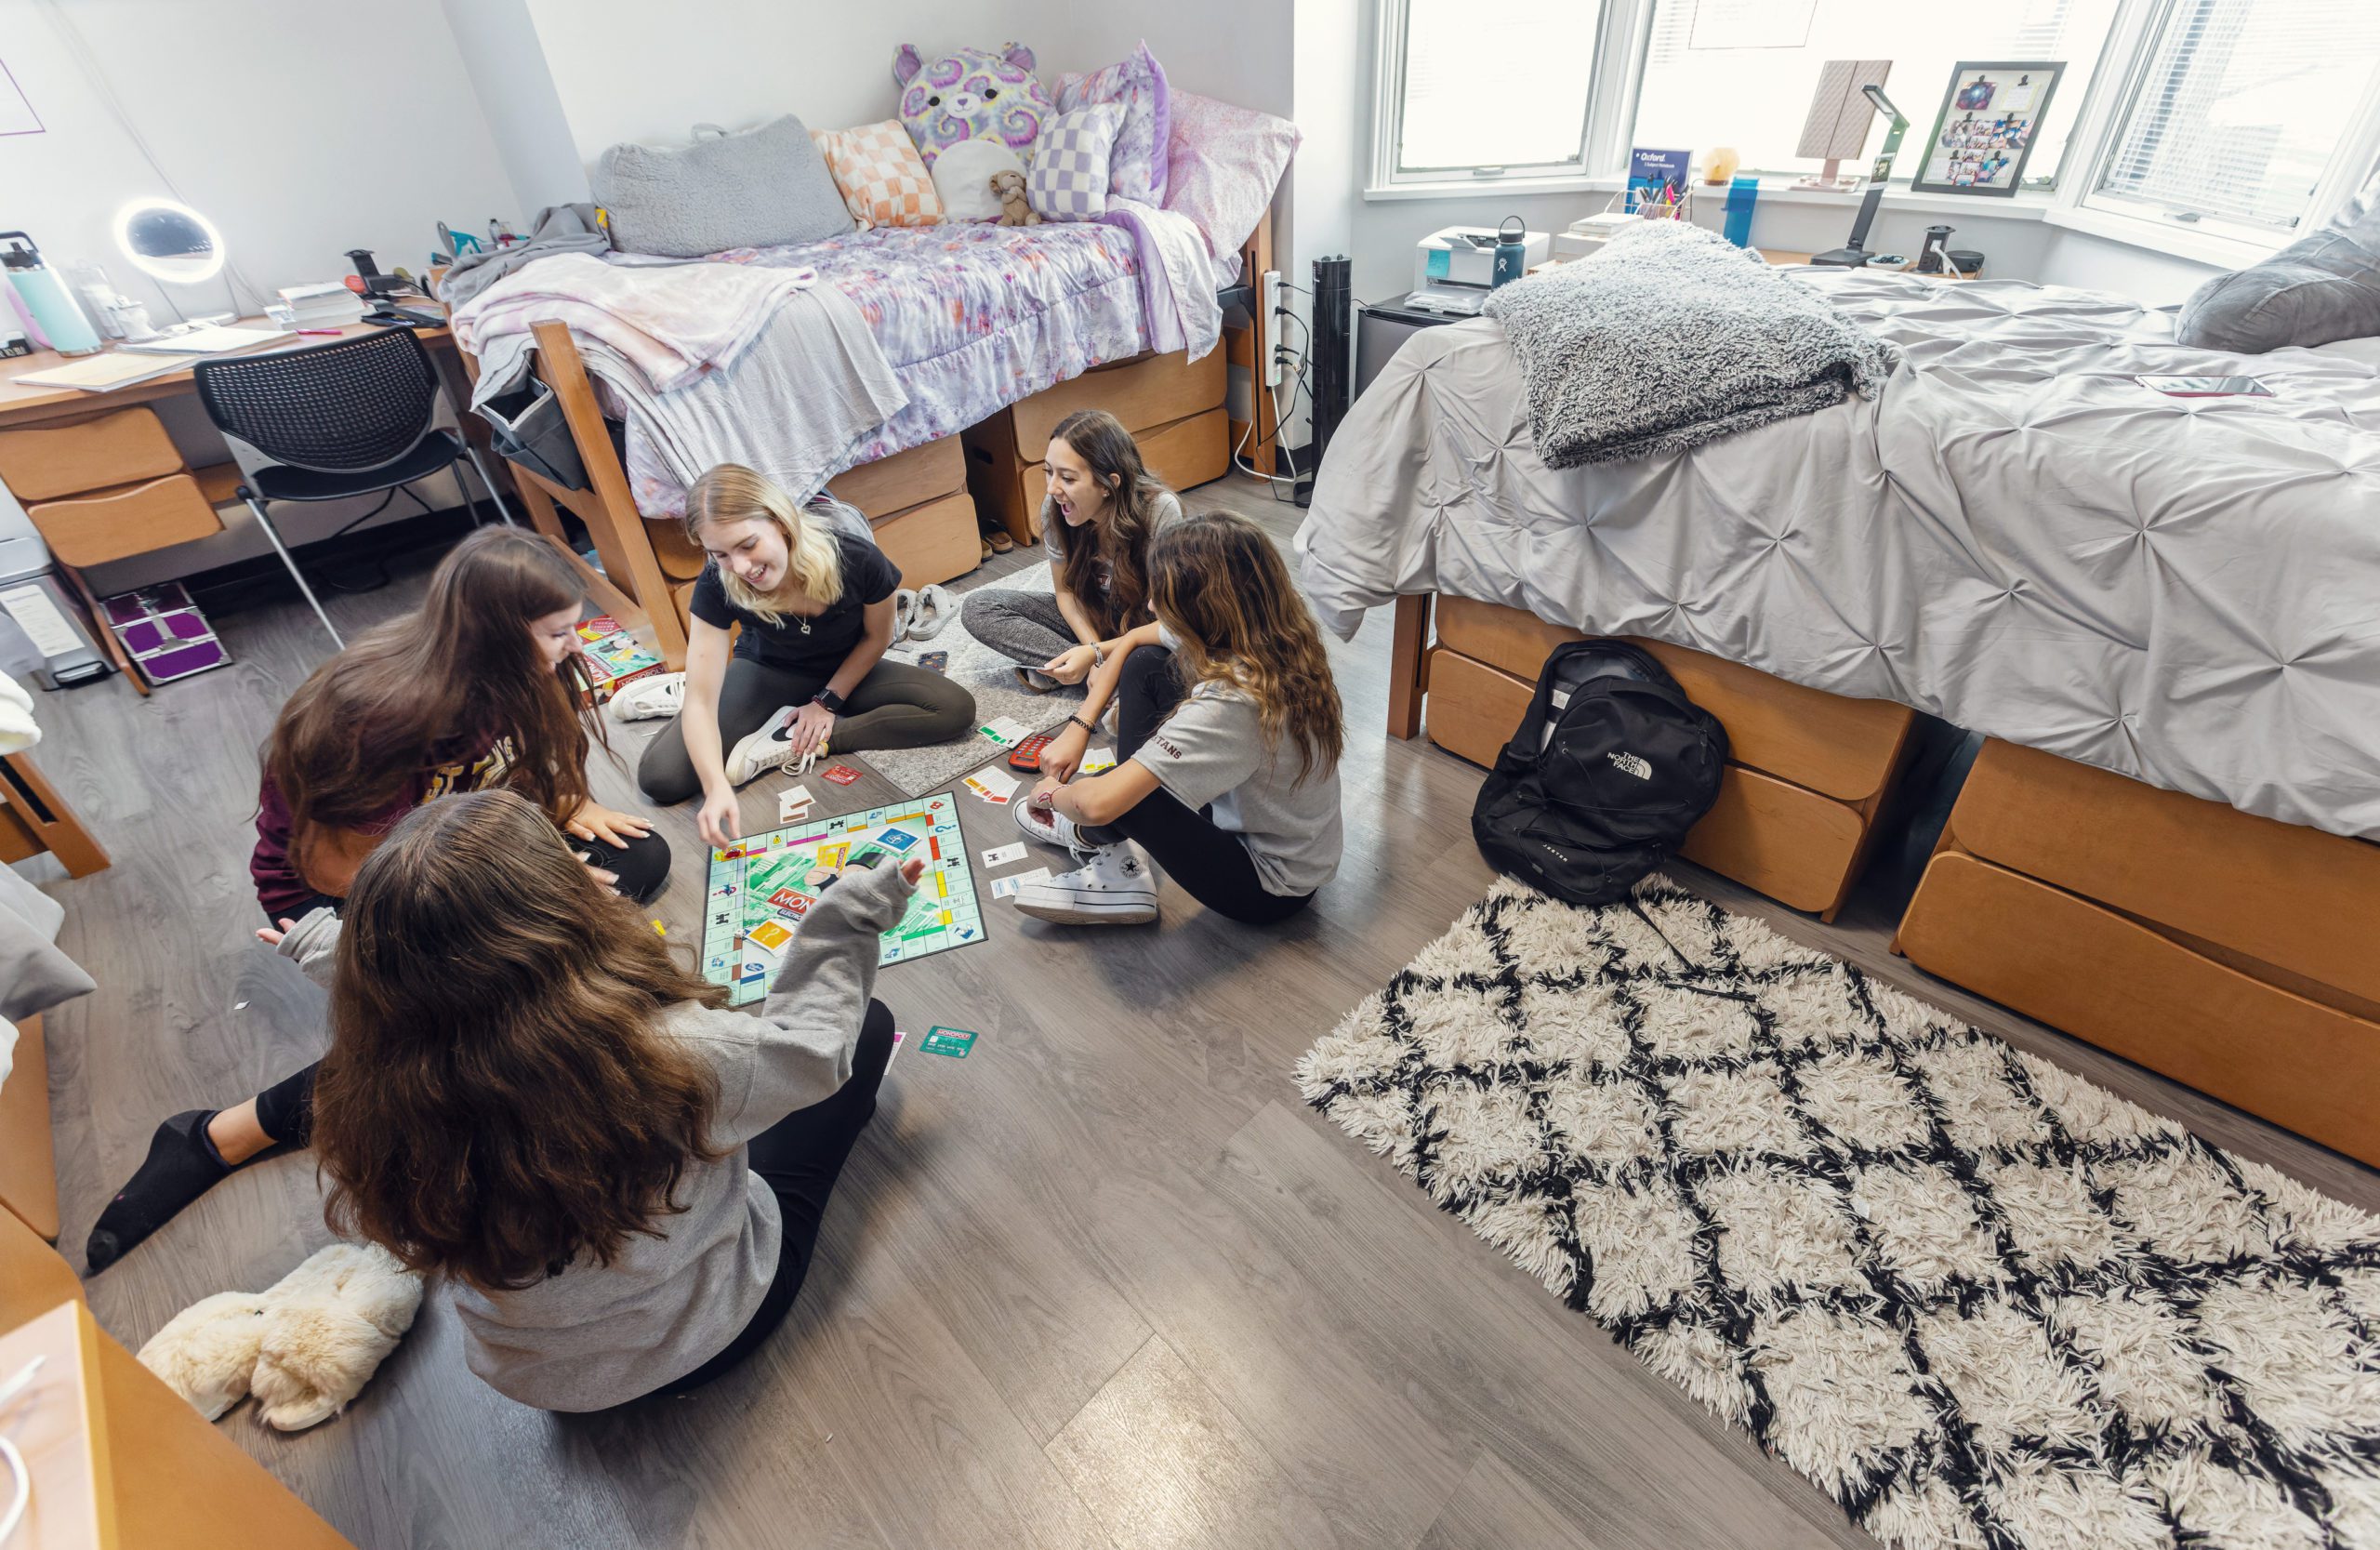 group of females sitting on dorm room floor playing game